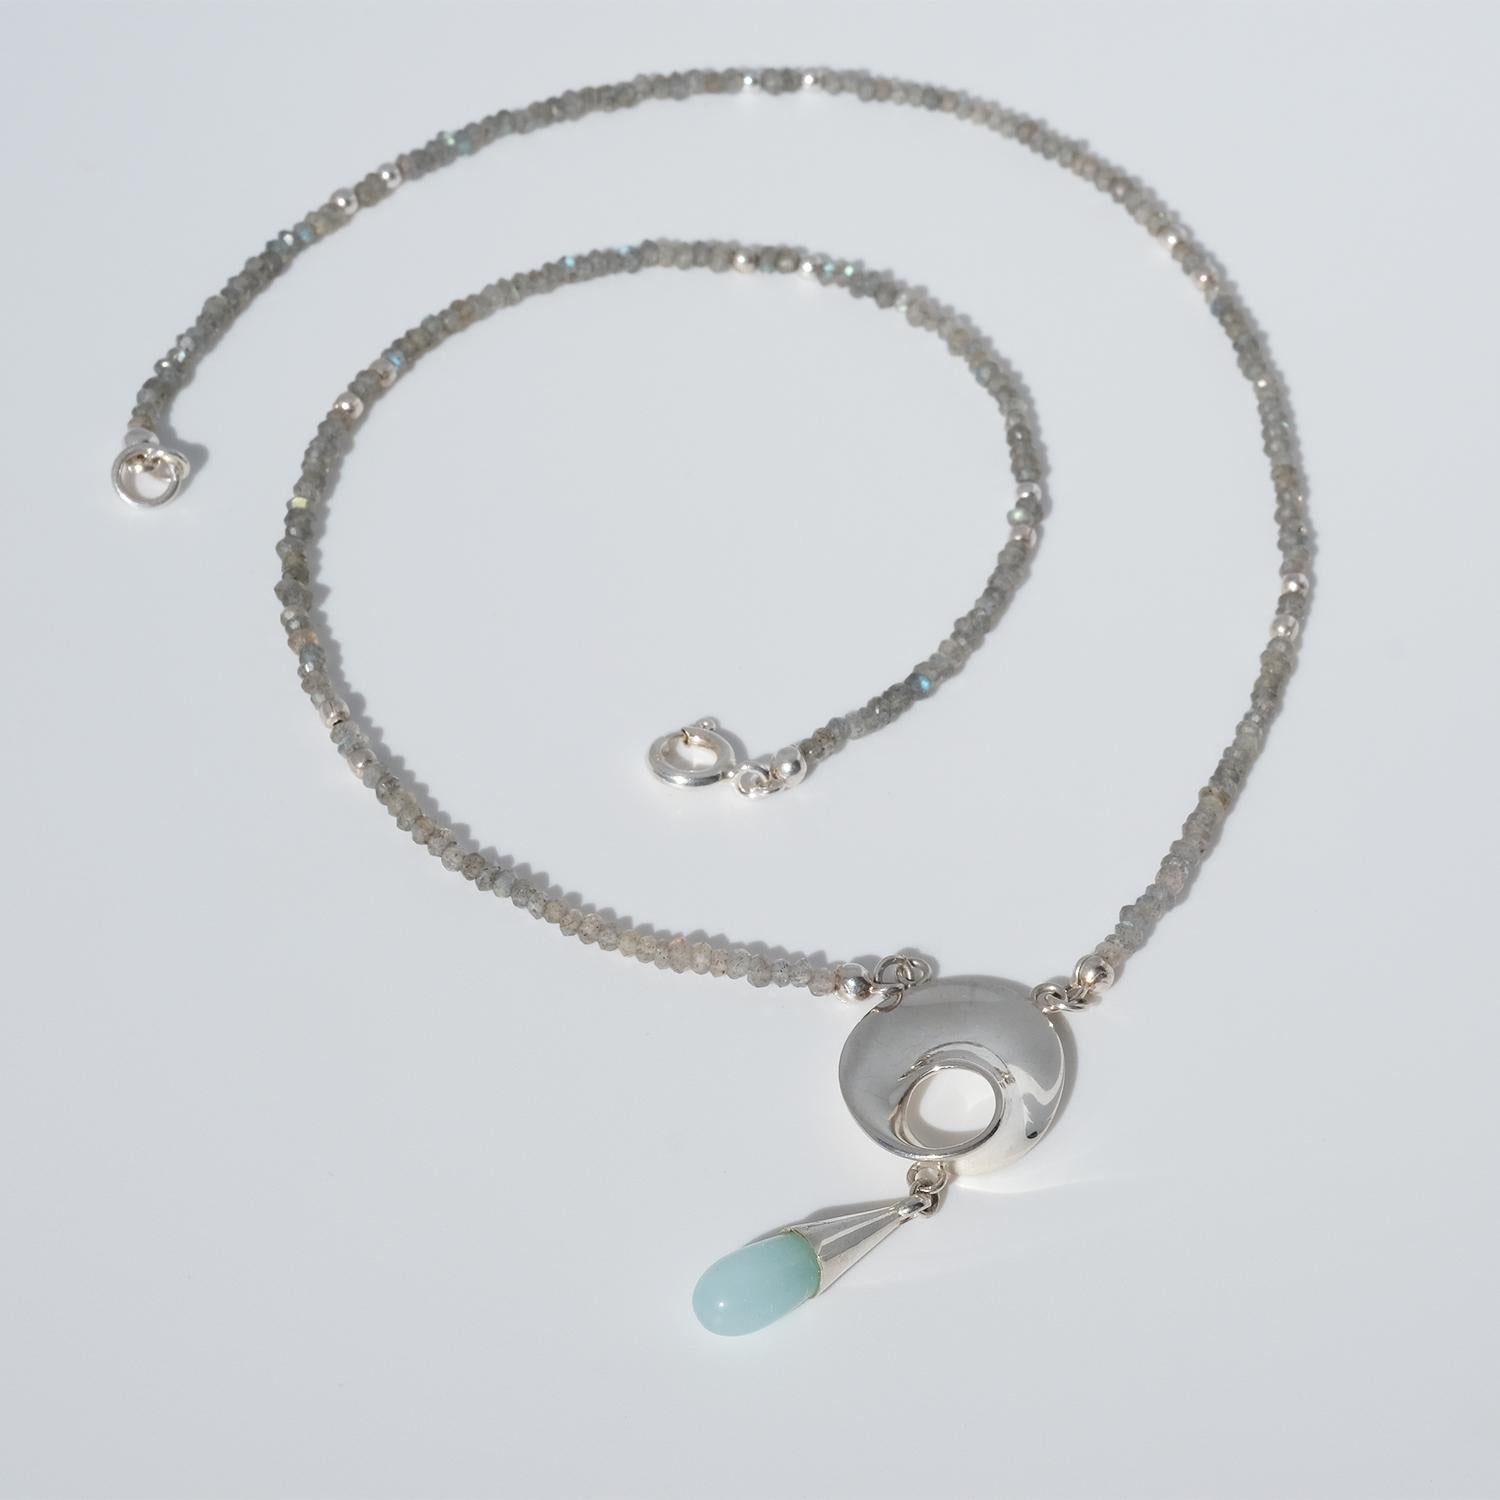 This necklace has a chain made out of faceted shimmering labradorites. The pendant has an organically shaped center section in sterling silver with a movable suspended chalcedony drop. This piece is a rare item.

If you’re a fan of casual outfits